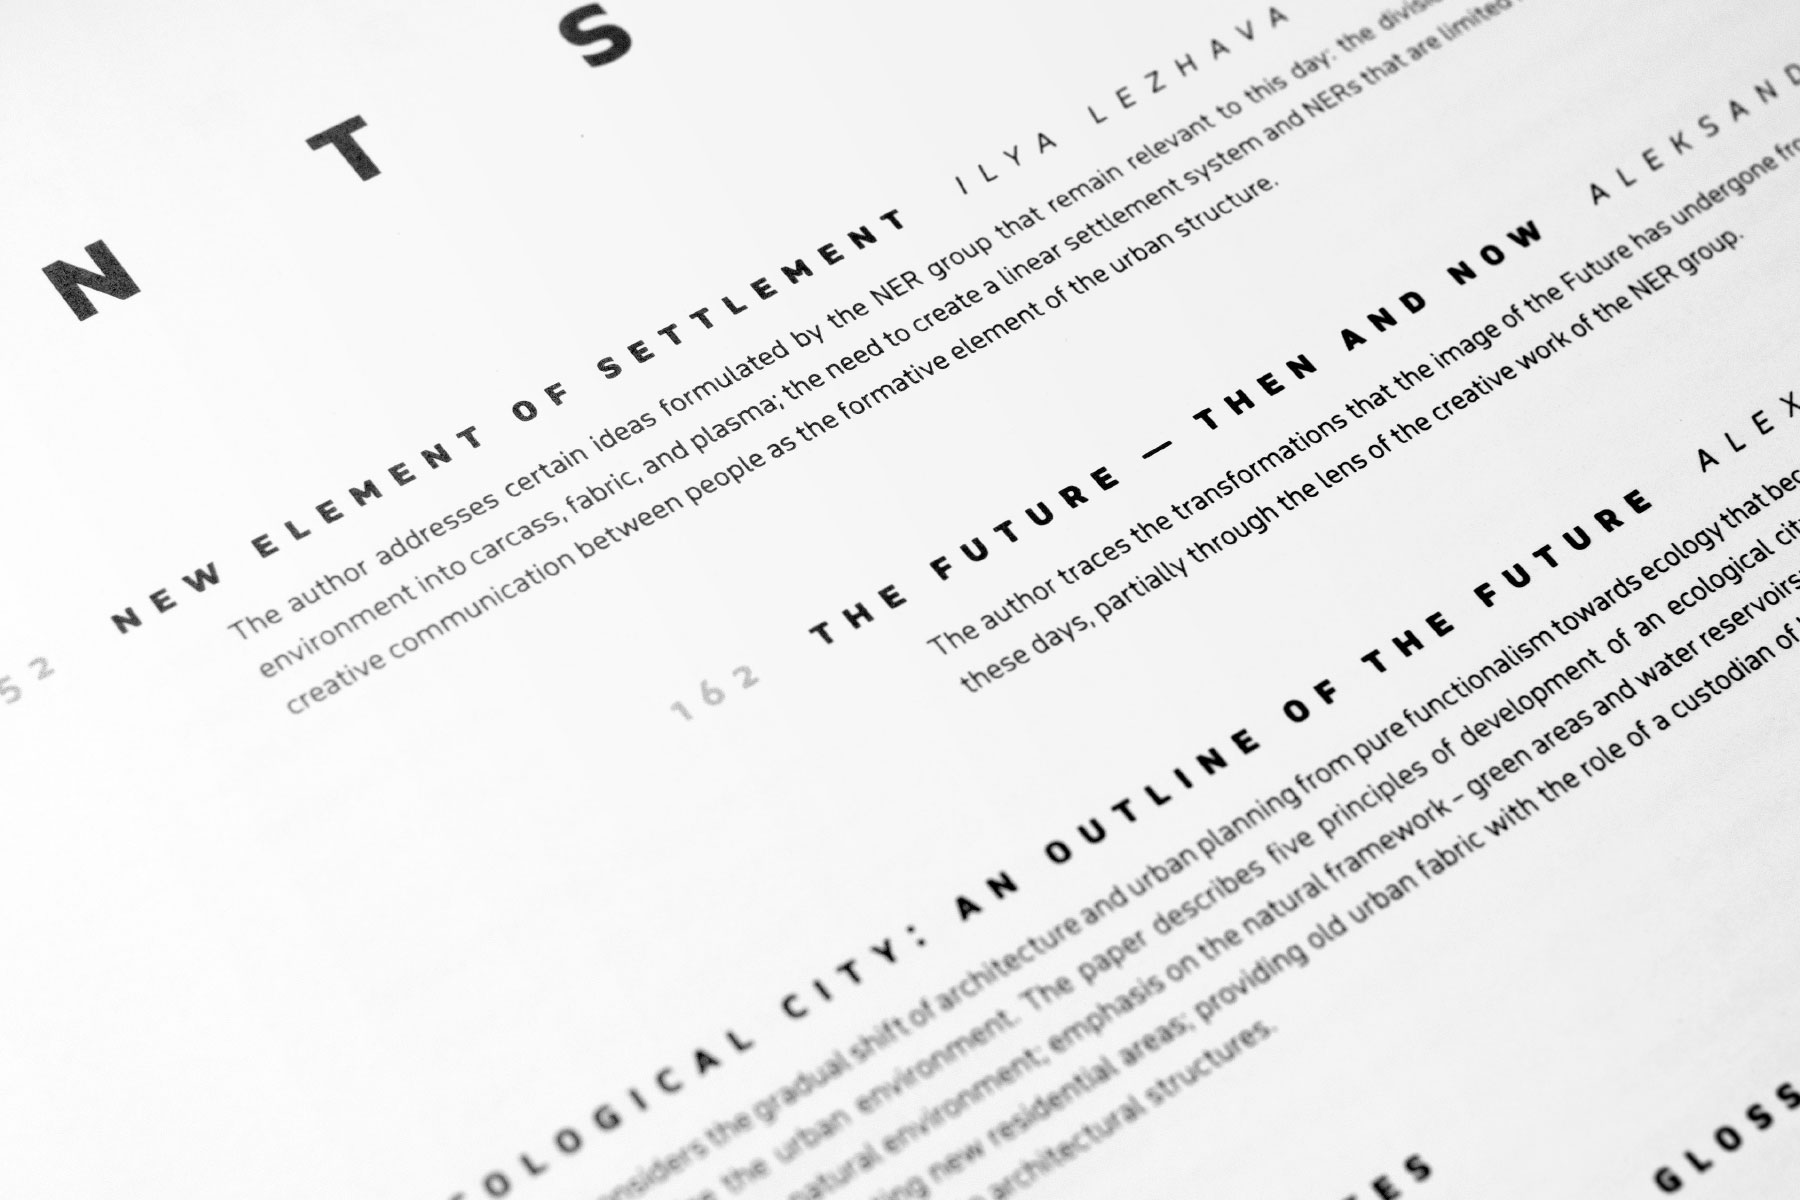 City of the Future book content's page with non-aligned blocks of typography